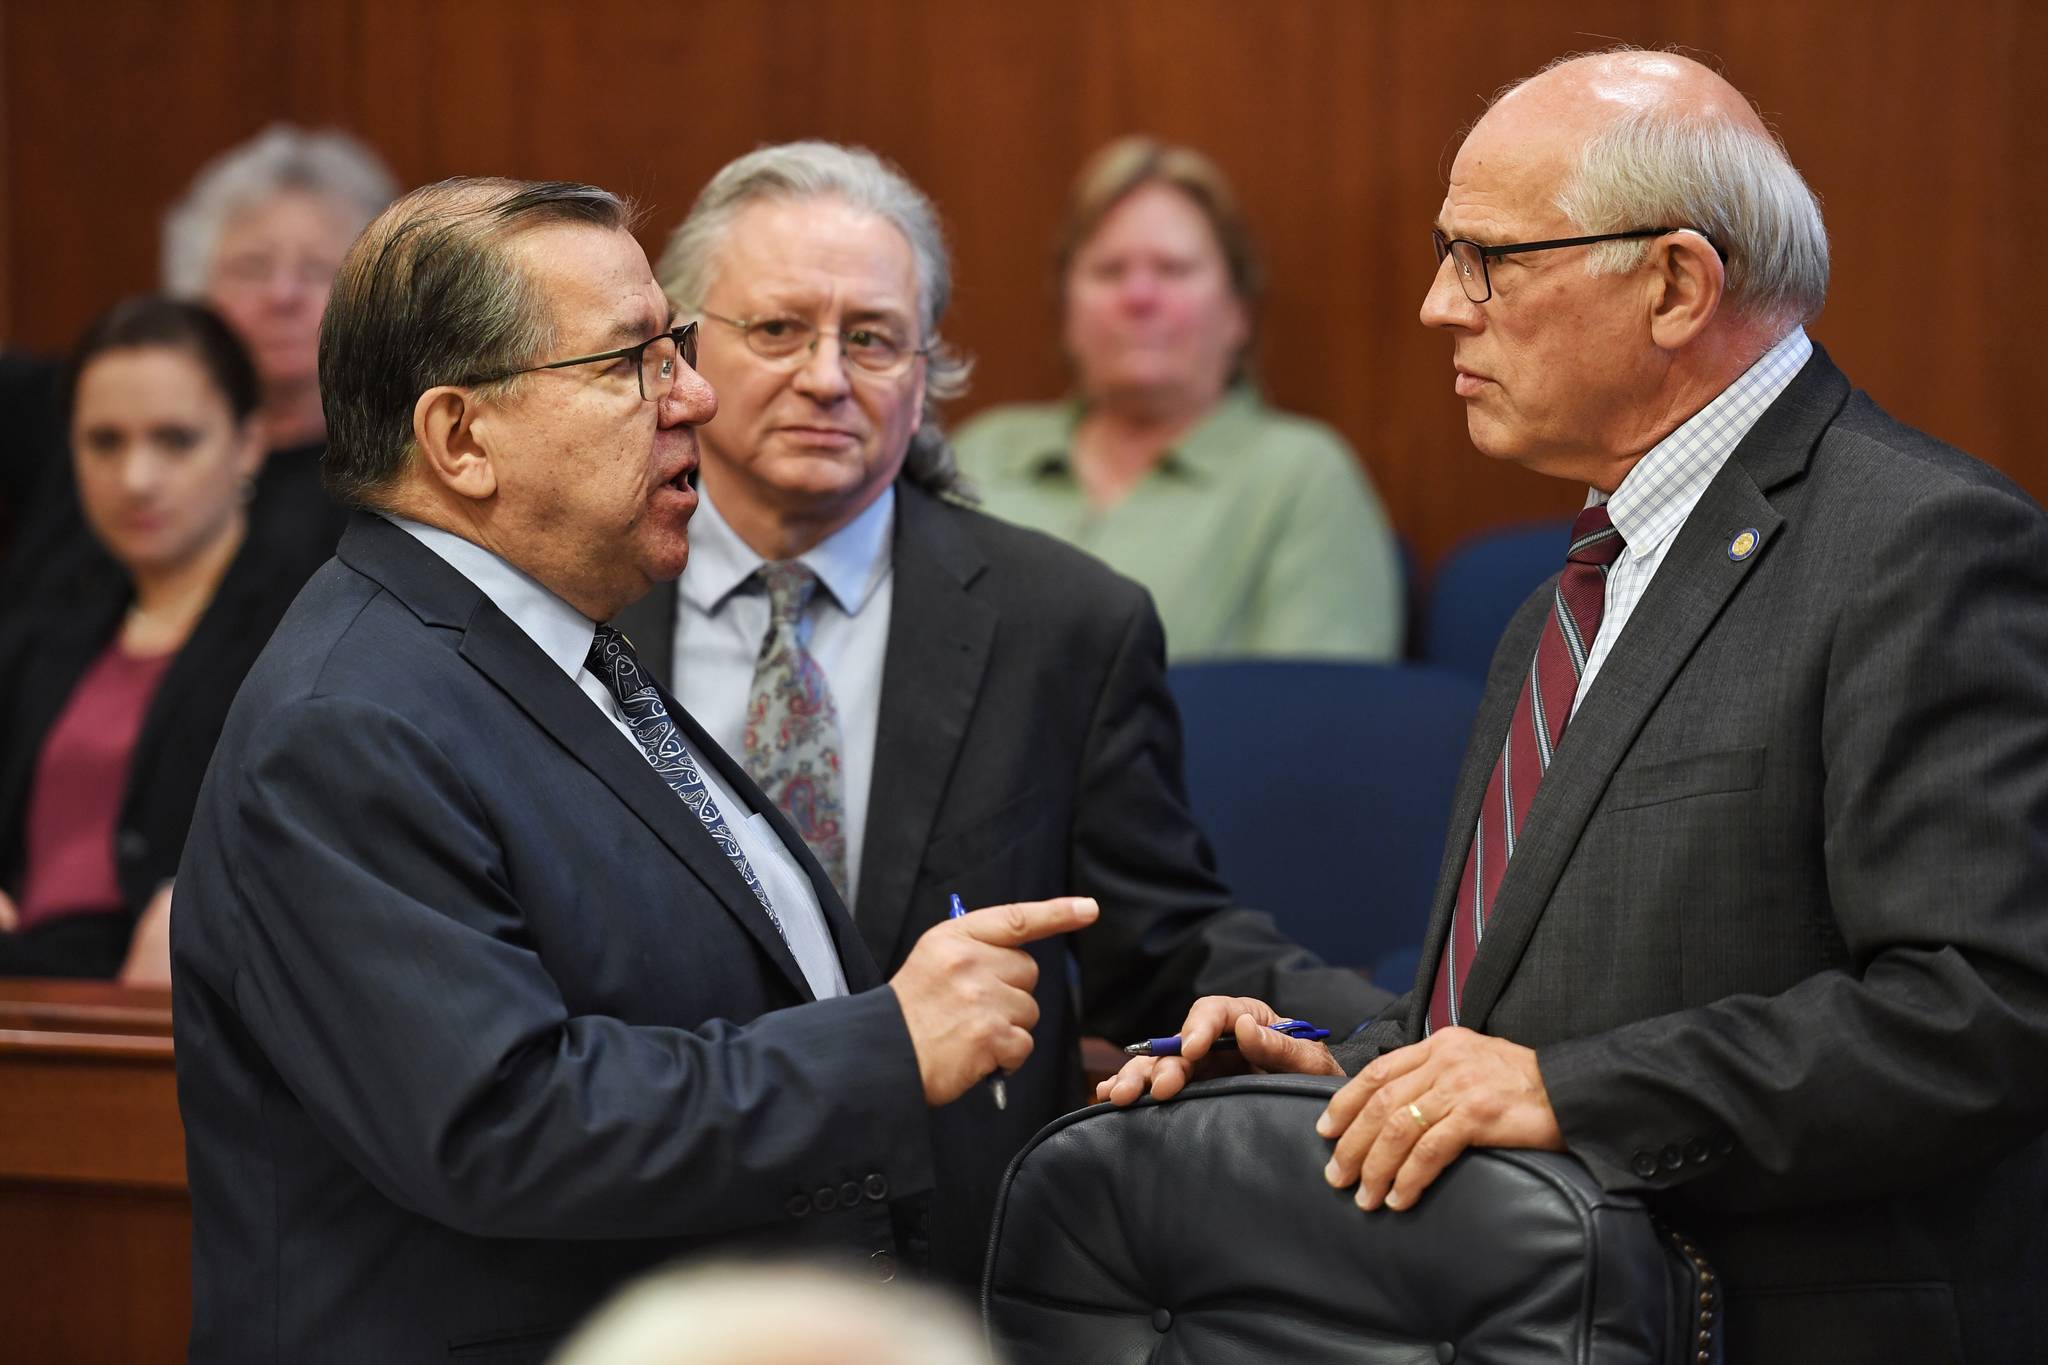 Sen. Lyman Hoffman, D-Bethel, left, expressed his displeasure with Sen. John Coghill, R-North Pole, right, as Sen. Tom Begich listens, during debate on the capital budget in the Senate at the Capitol on Thursday , June 13, 2019. (Michael Penn | Juneau Empire)